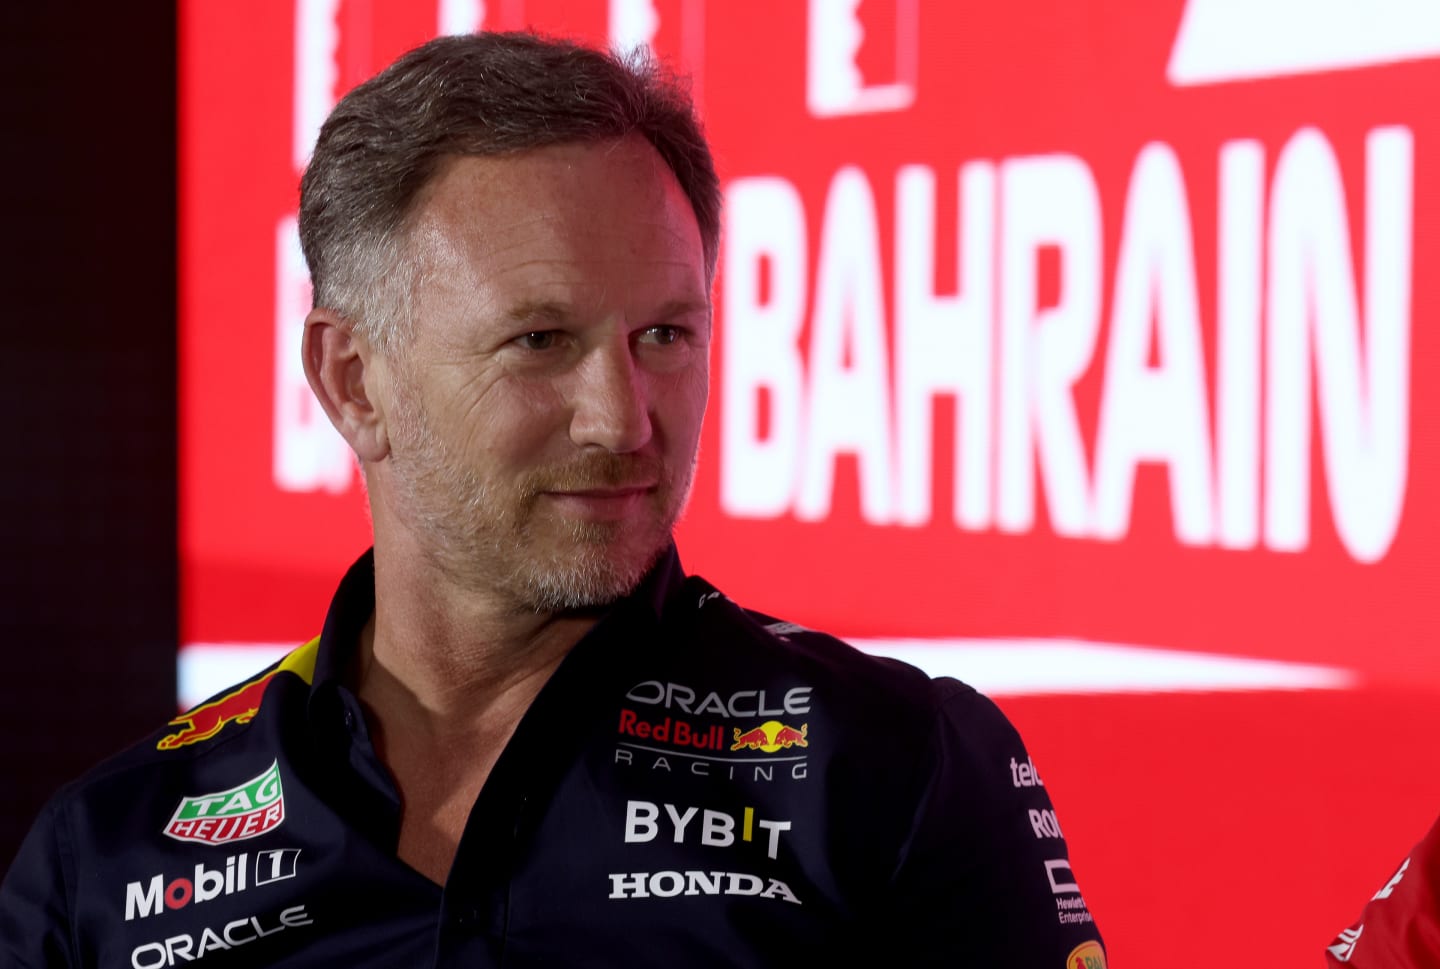 BAHRAIN, BAHRAIN - MARCH 03: Red Bull Racing Team Principal Christian Horner attends the Team Principals Press Conference during practice ahead of the F1 Grand Prix of Bahrain at Bahrain International Circuit on March 03, 2023 in Bahrain, Bahrain. (Photo by Lars Baron/Getty Images)